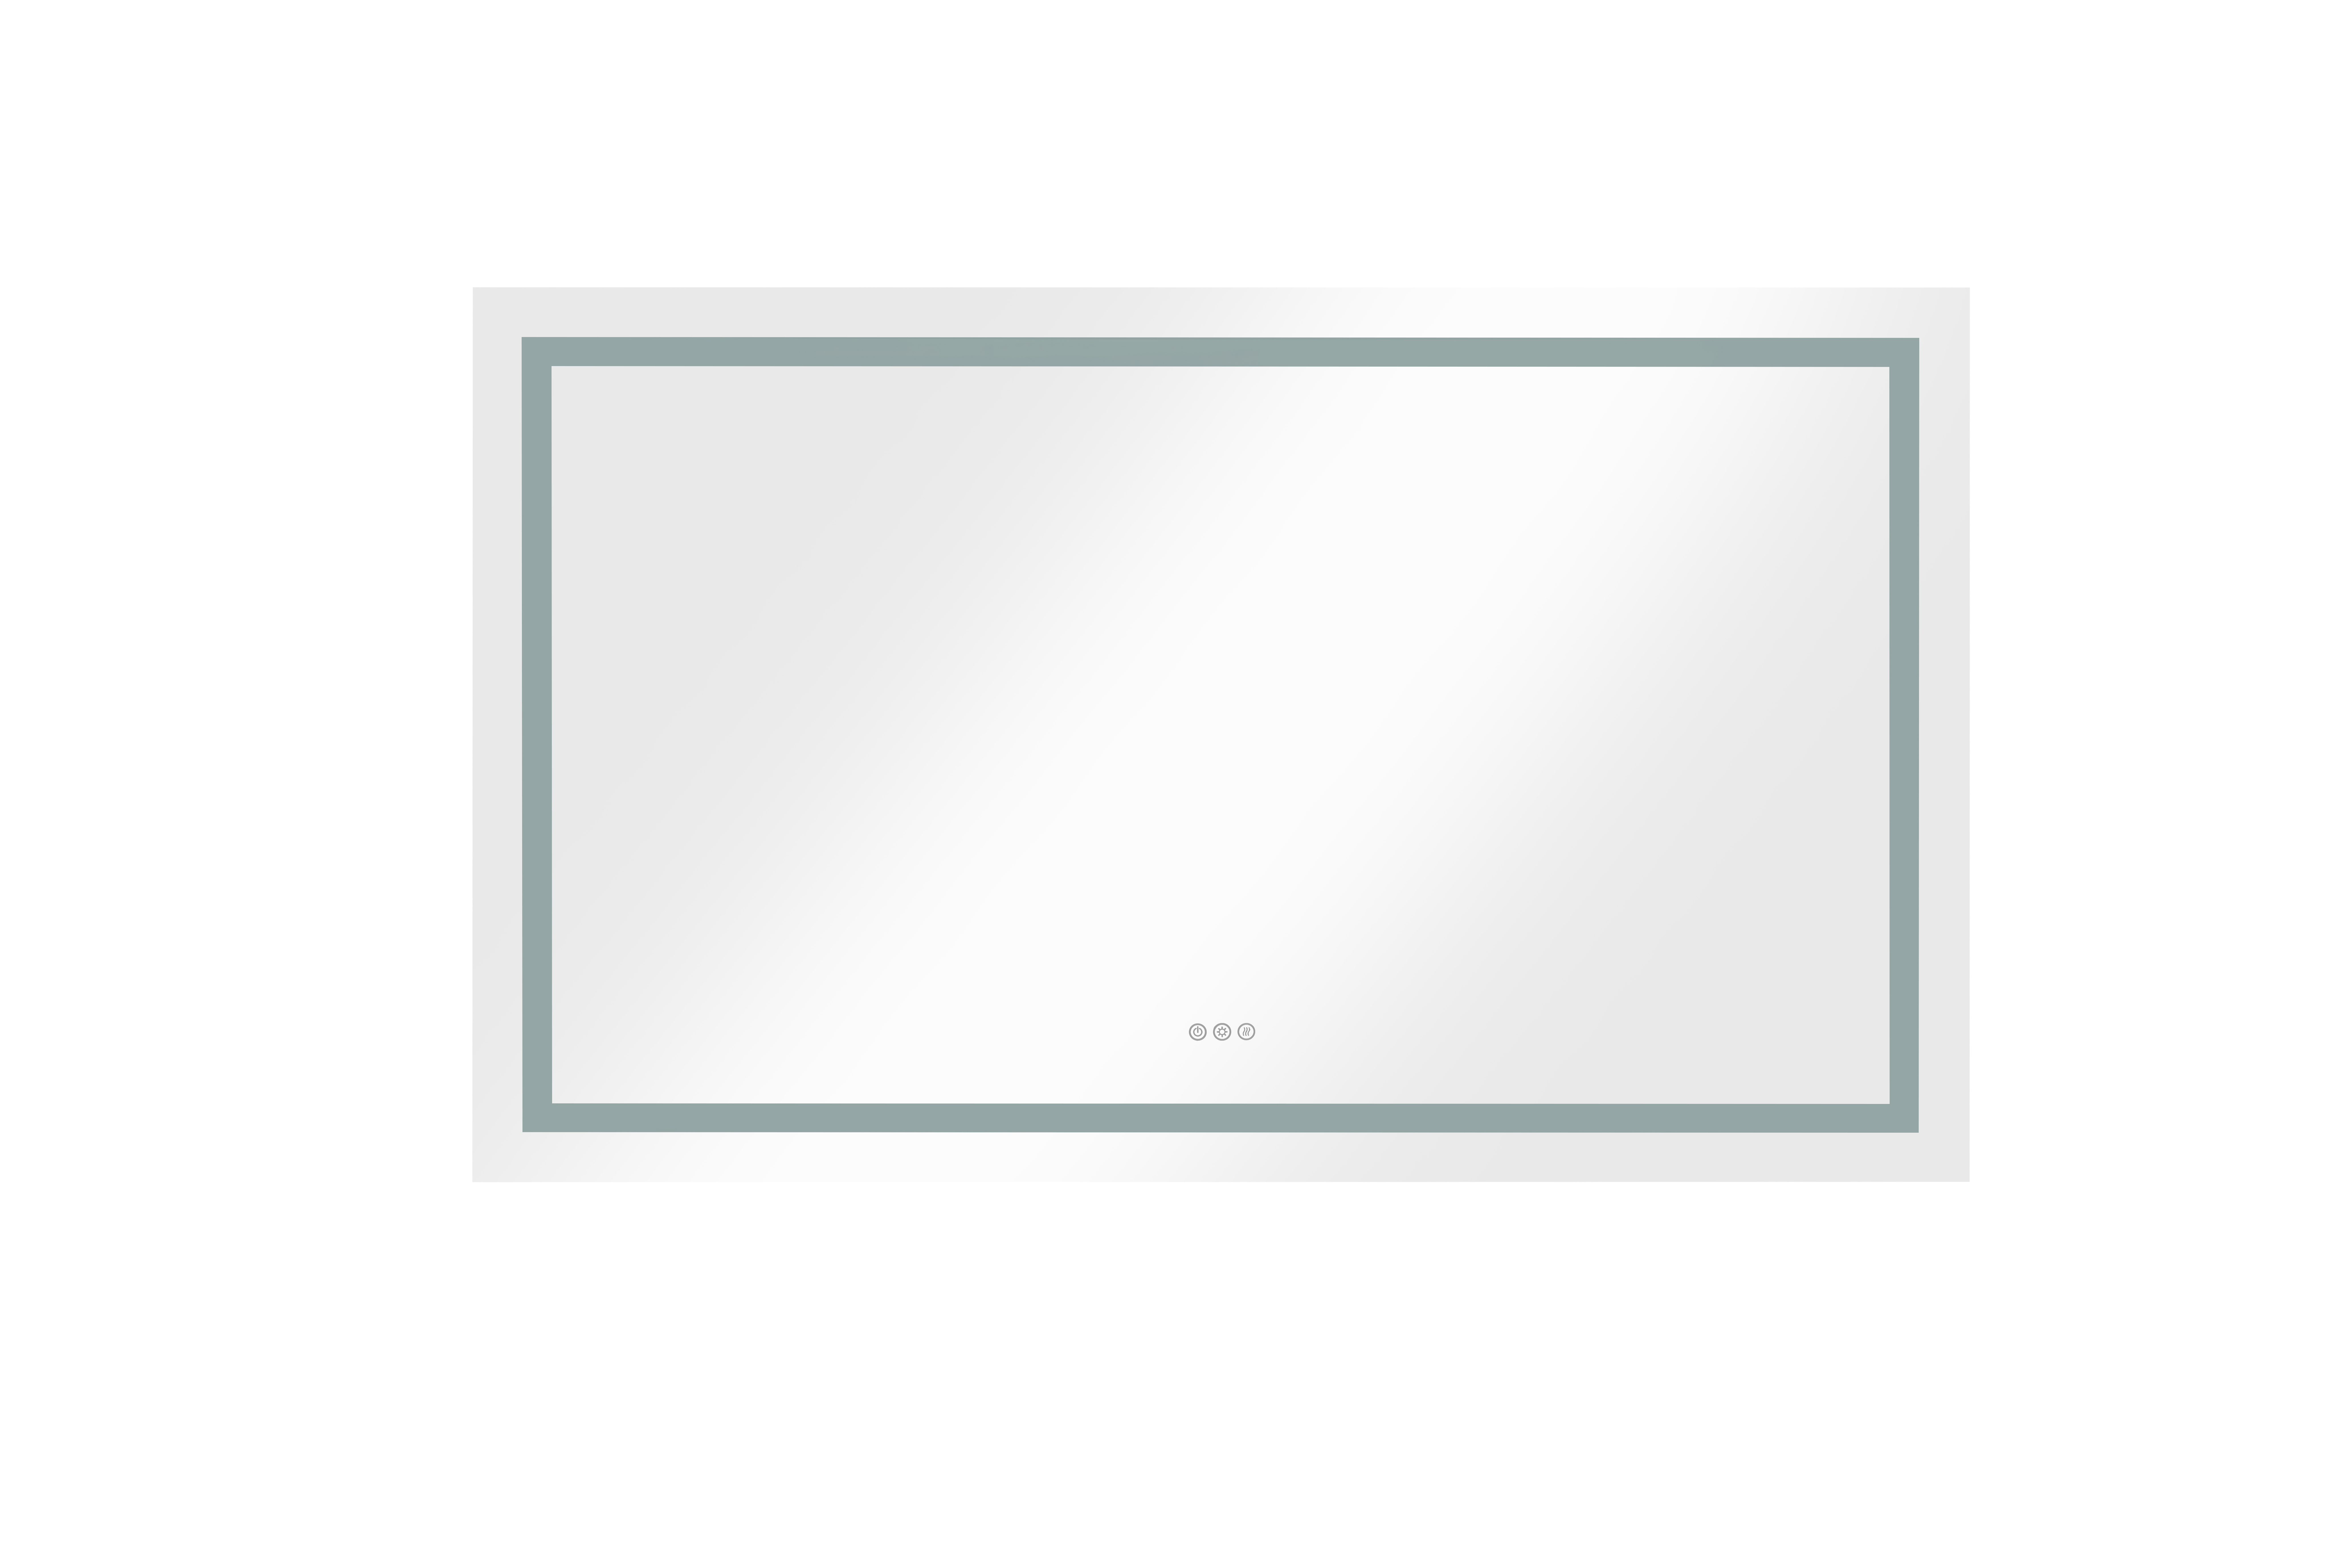 72 x 36 Inch LED Bathroom Mirror with Lights, Lighted Vanity Mirror, Anti Fog Design , Large Wall Mounted Light Up Mirror , Hanging, Rectangle-CASAINC